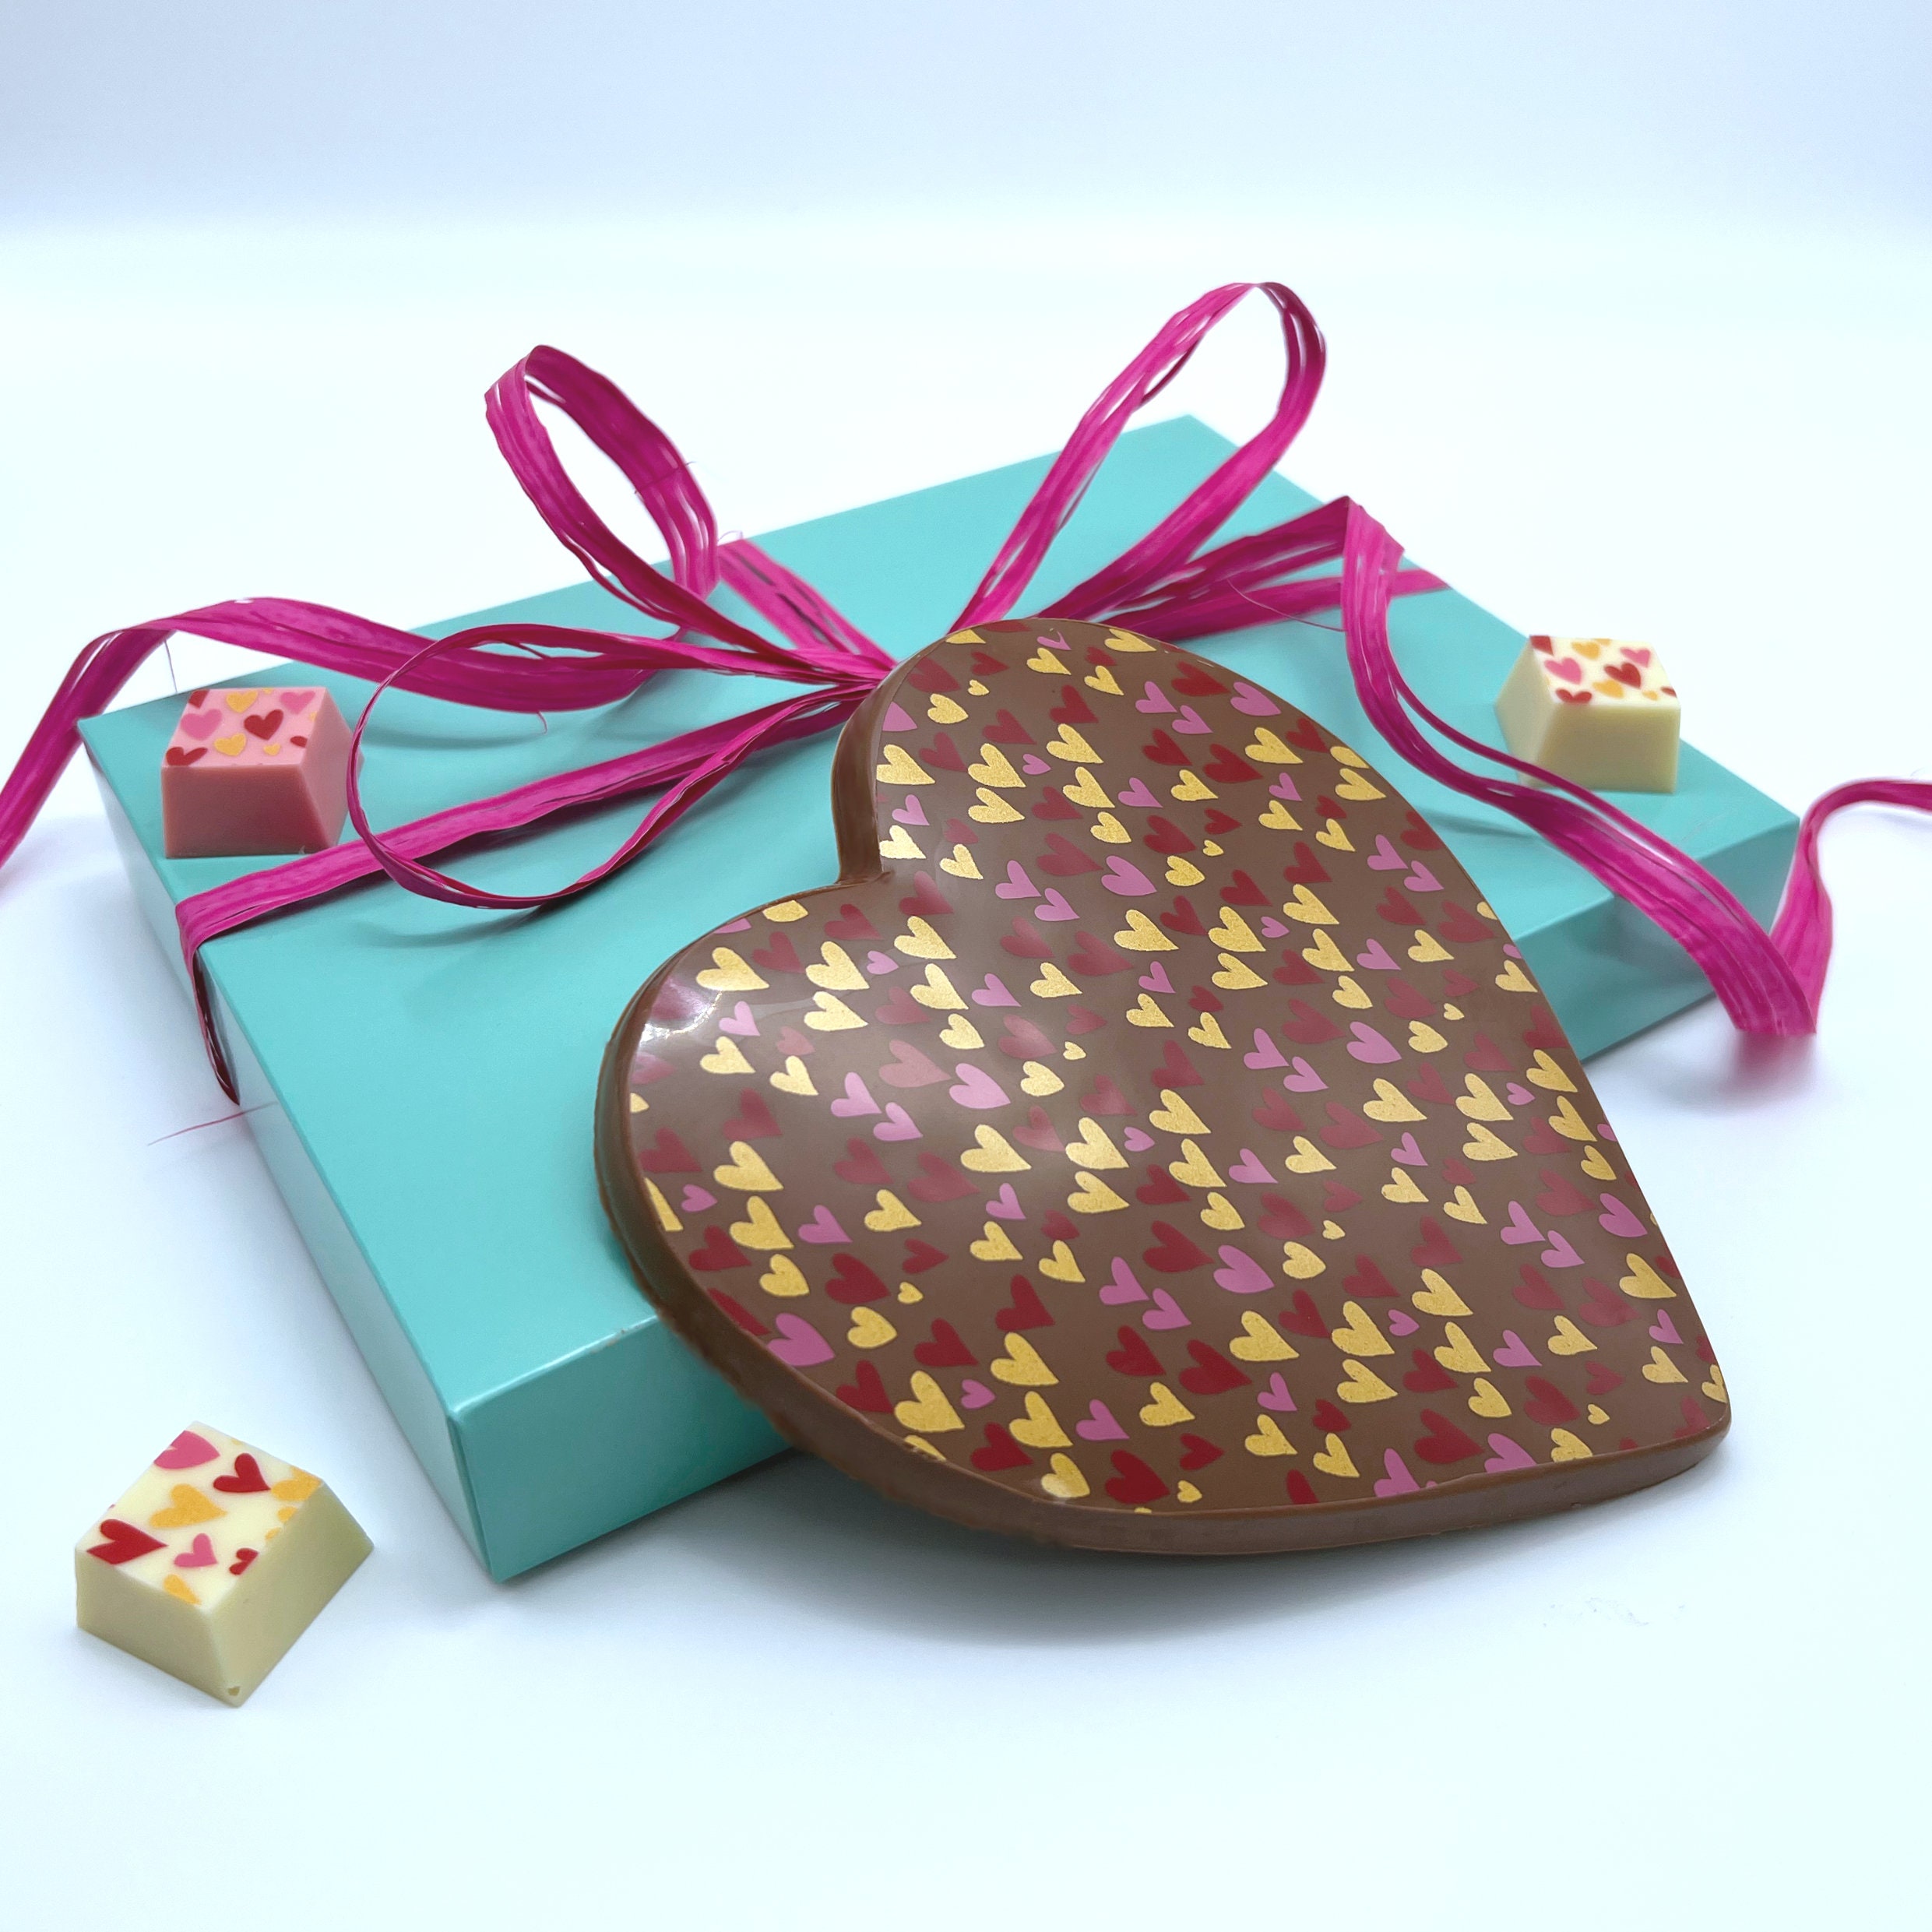 Chocolate Heart Box Filled With 2 Hearts and Buttons 